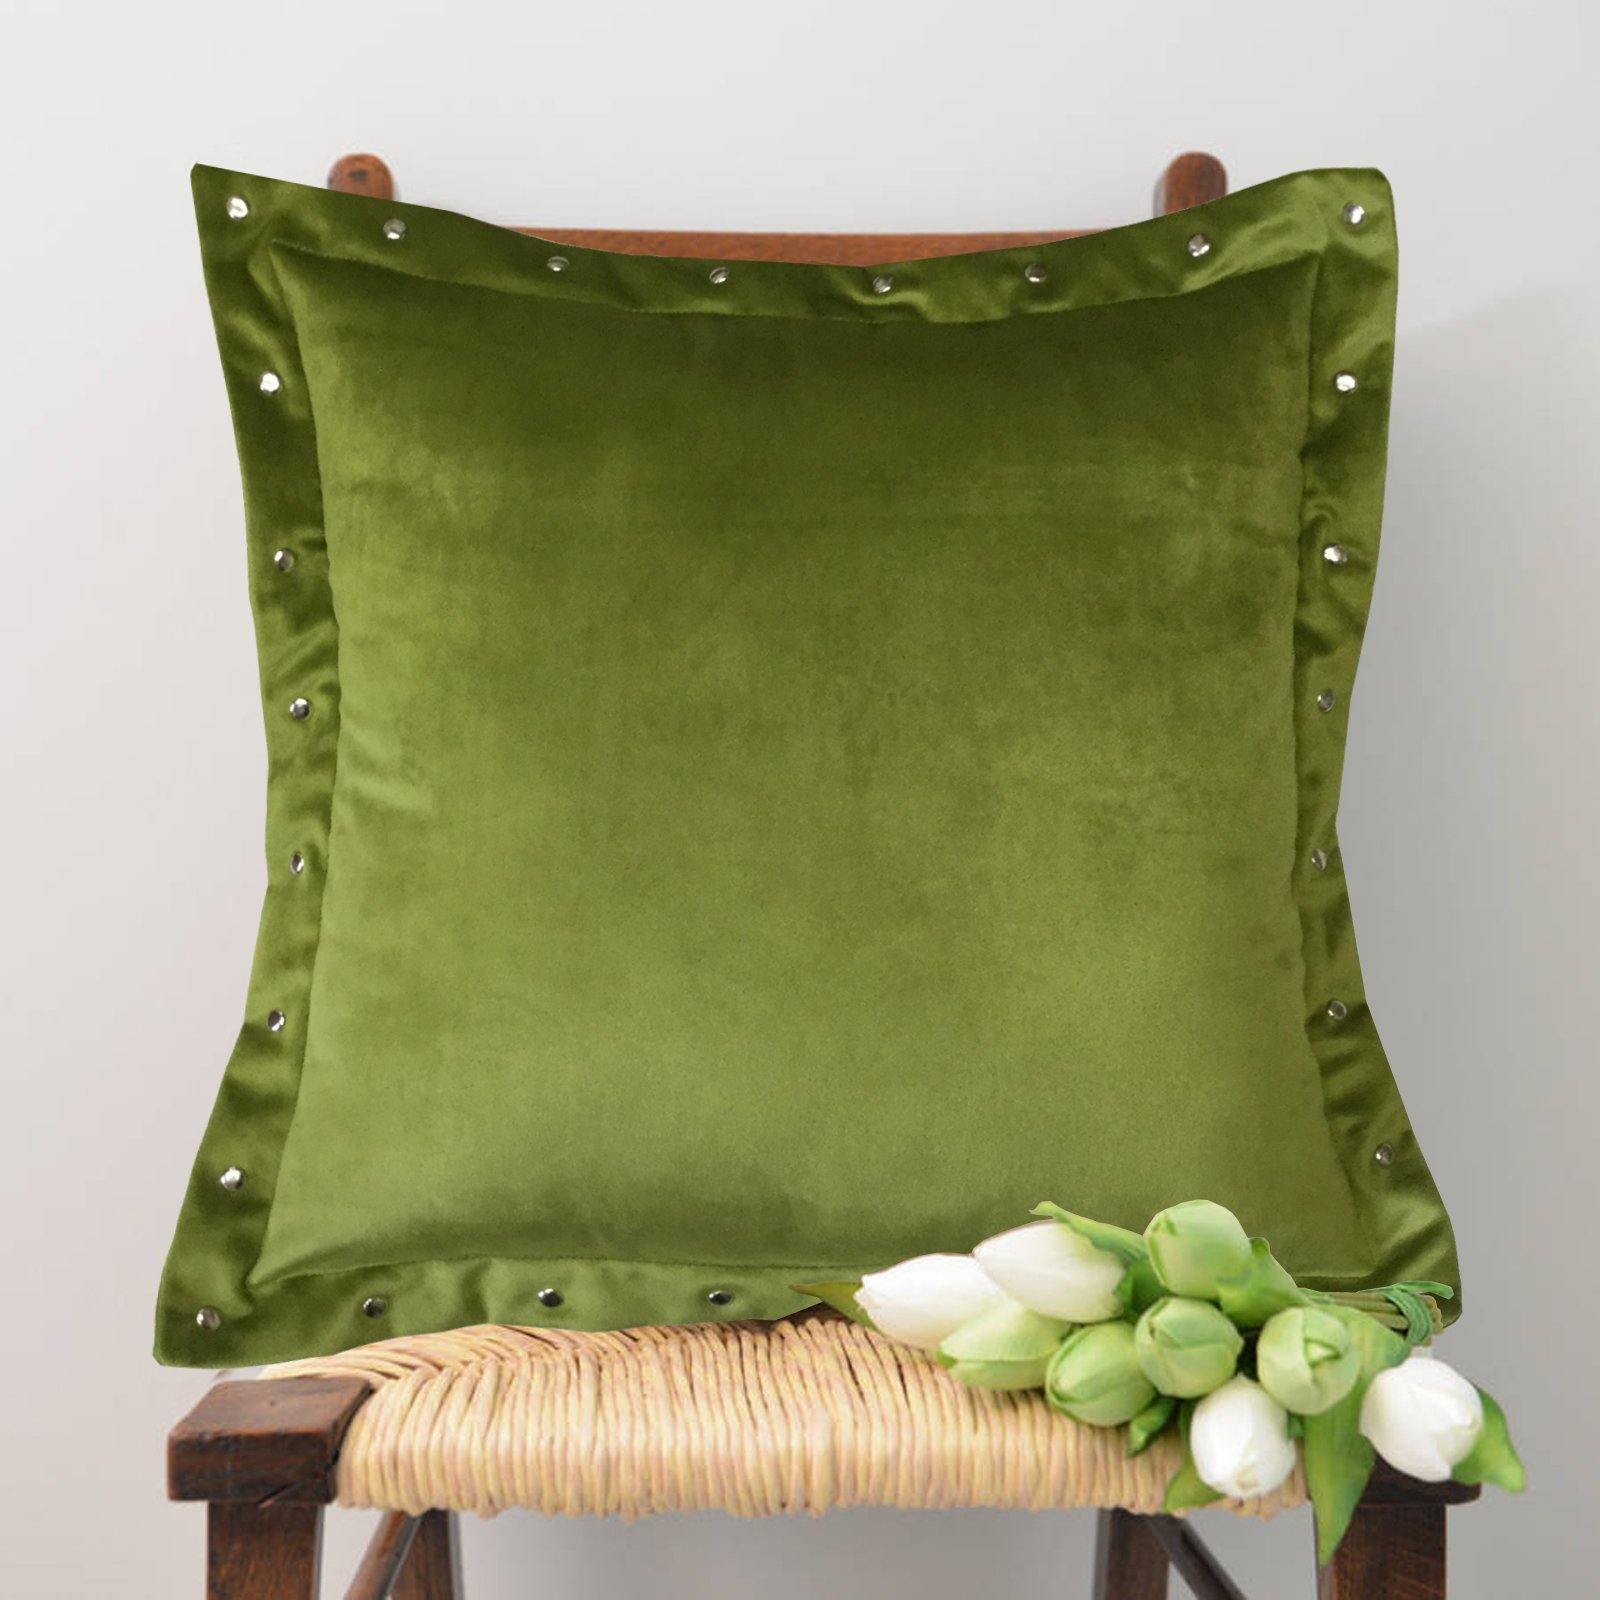 Lushomes Smooth Green Velvet Cushion covers with some metallic Oomph (Single Pc, 16‰۝ x 16‰۝) - Lushomes